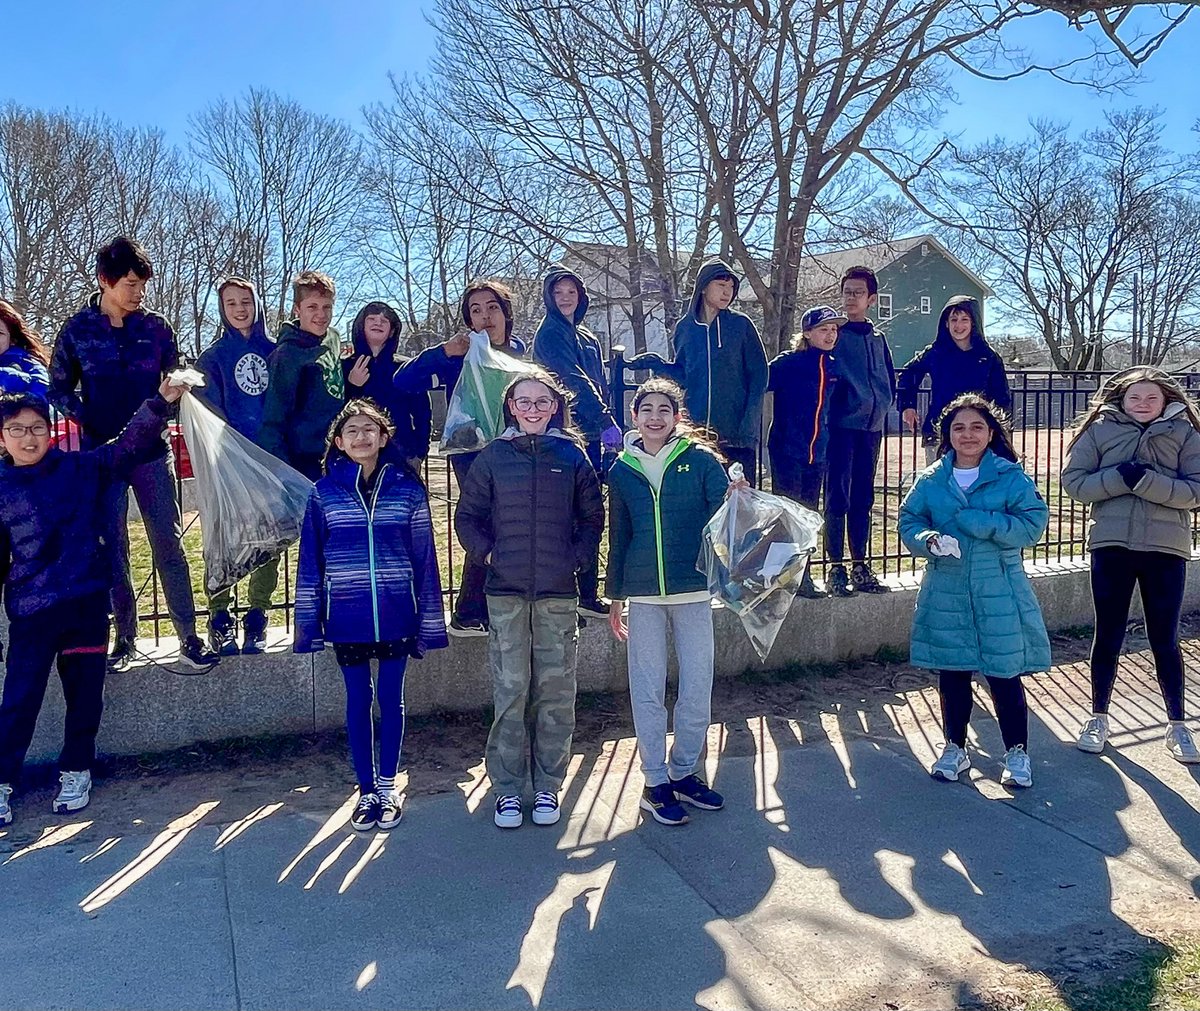 Our Middle School students went outside during assembly today for a community clean up around the neighbourhood as part of the Great Nova Scotia Pick-Me-Up in celebration of Earth Day! 🌎 #HalifaxGrammar #EarthDay #GreatNSPickMeUp #CleanPlanet #CommunityCleanUp #BeTheChange